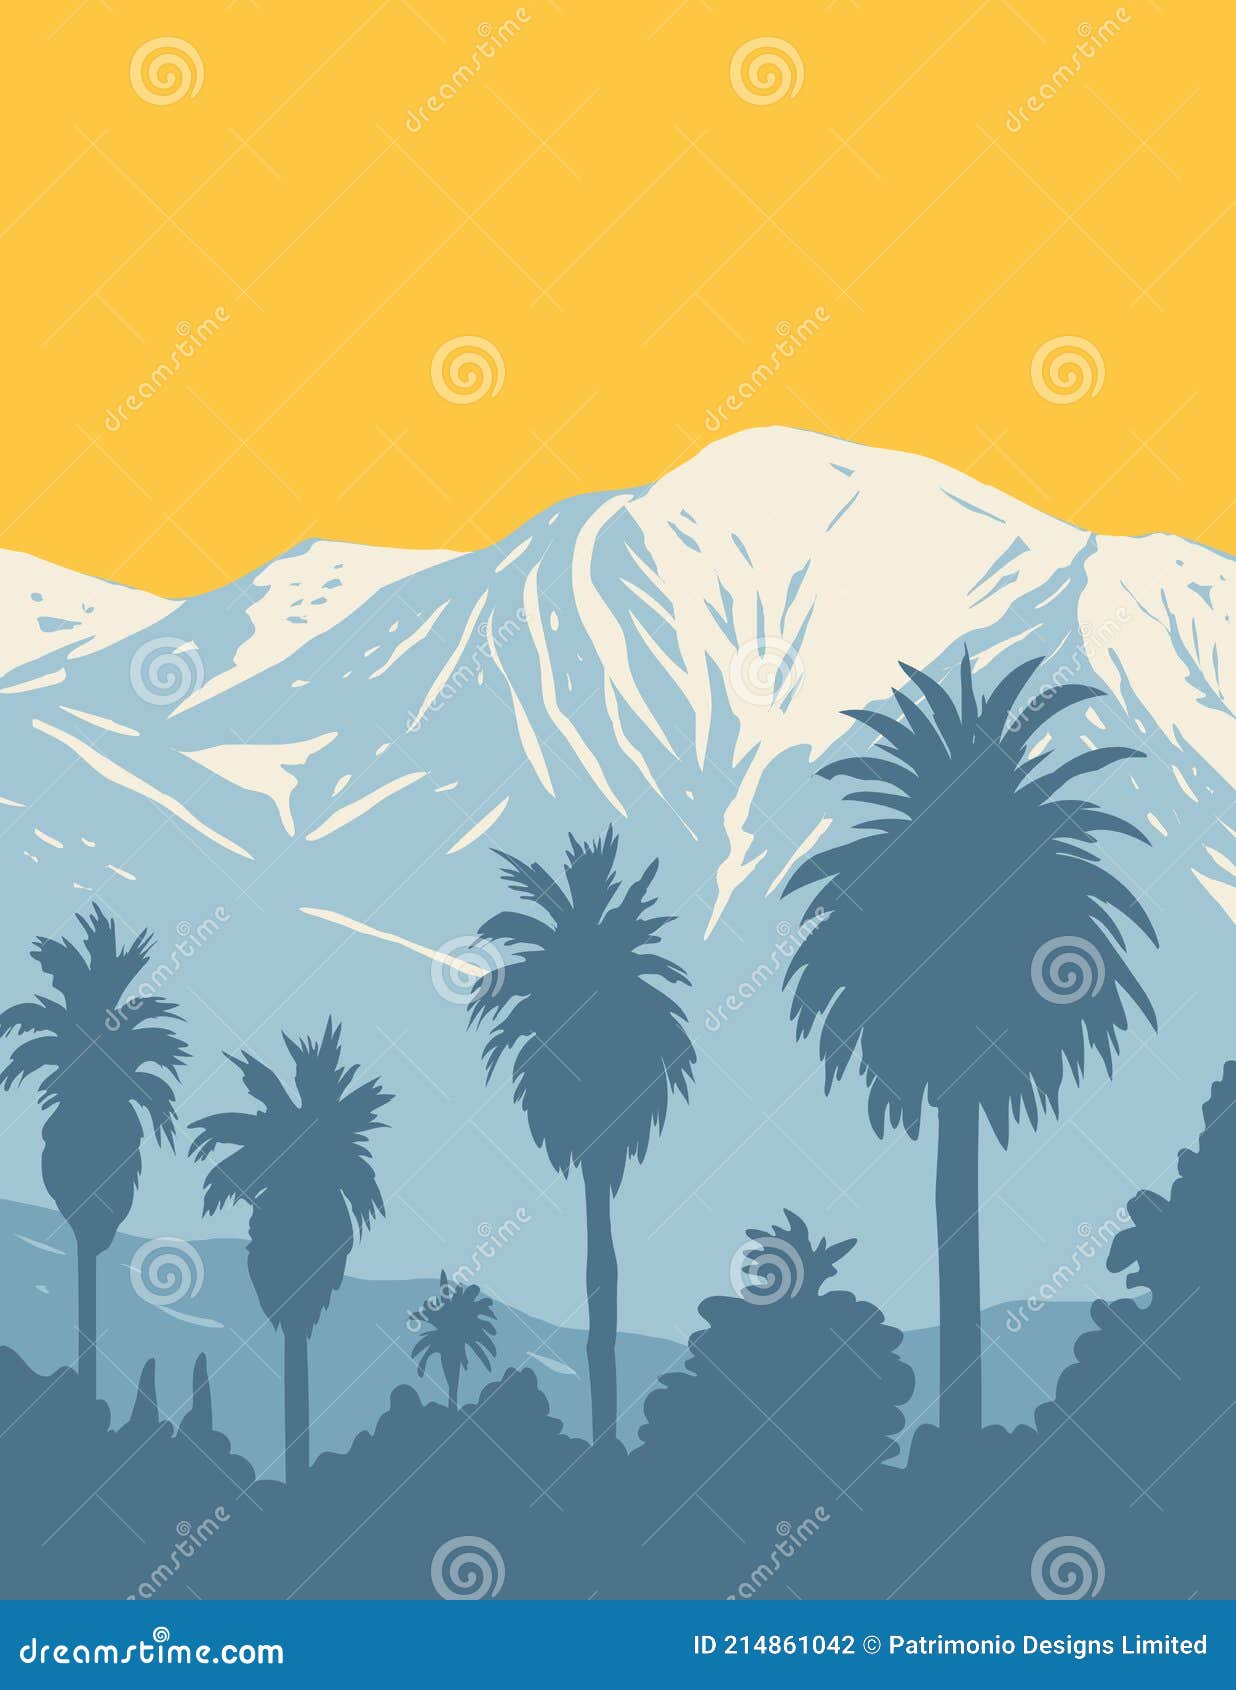 the san gabriel mountains national monument located in angeles and san bernardino national forest california wpa poster art